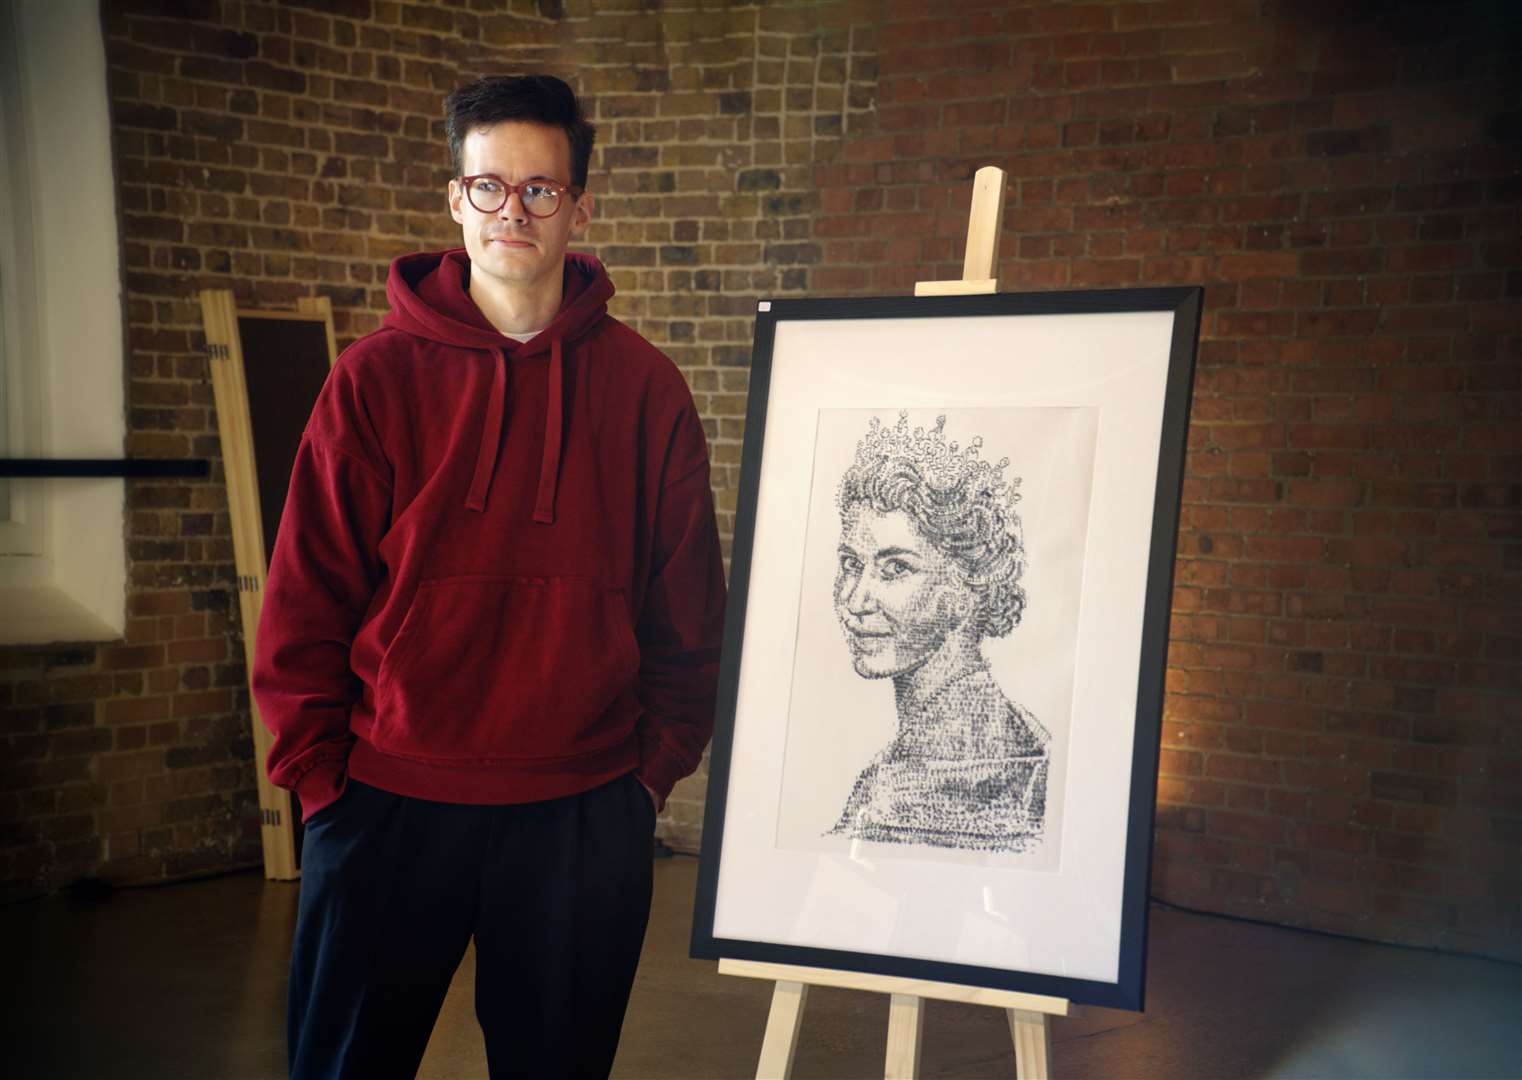 James Cook with a framed artwork of The Queen, which he drew (James Cook/PA)